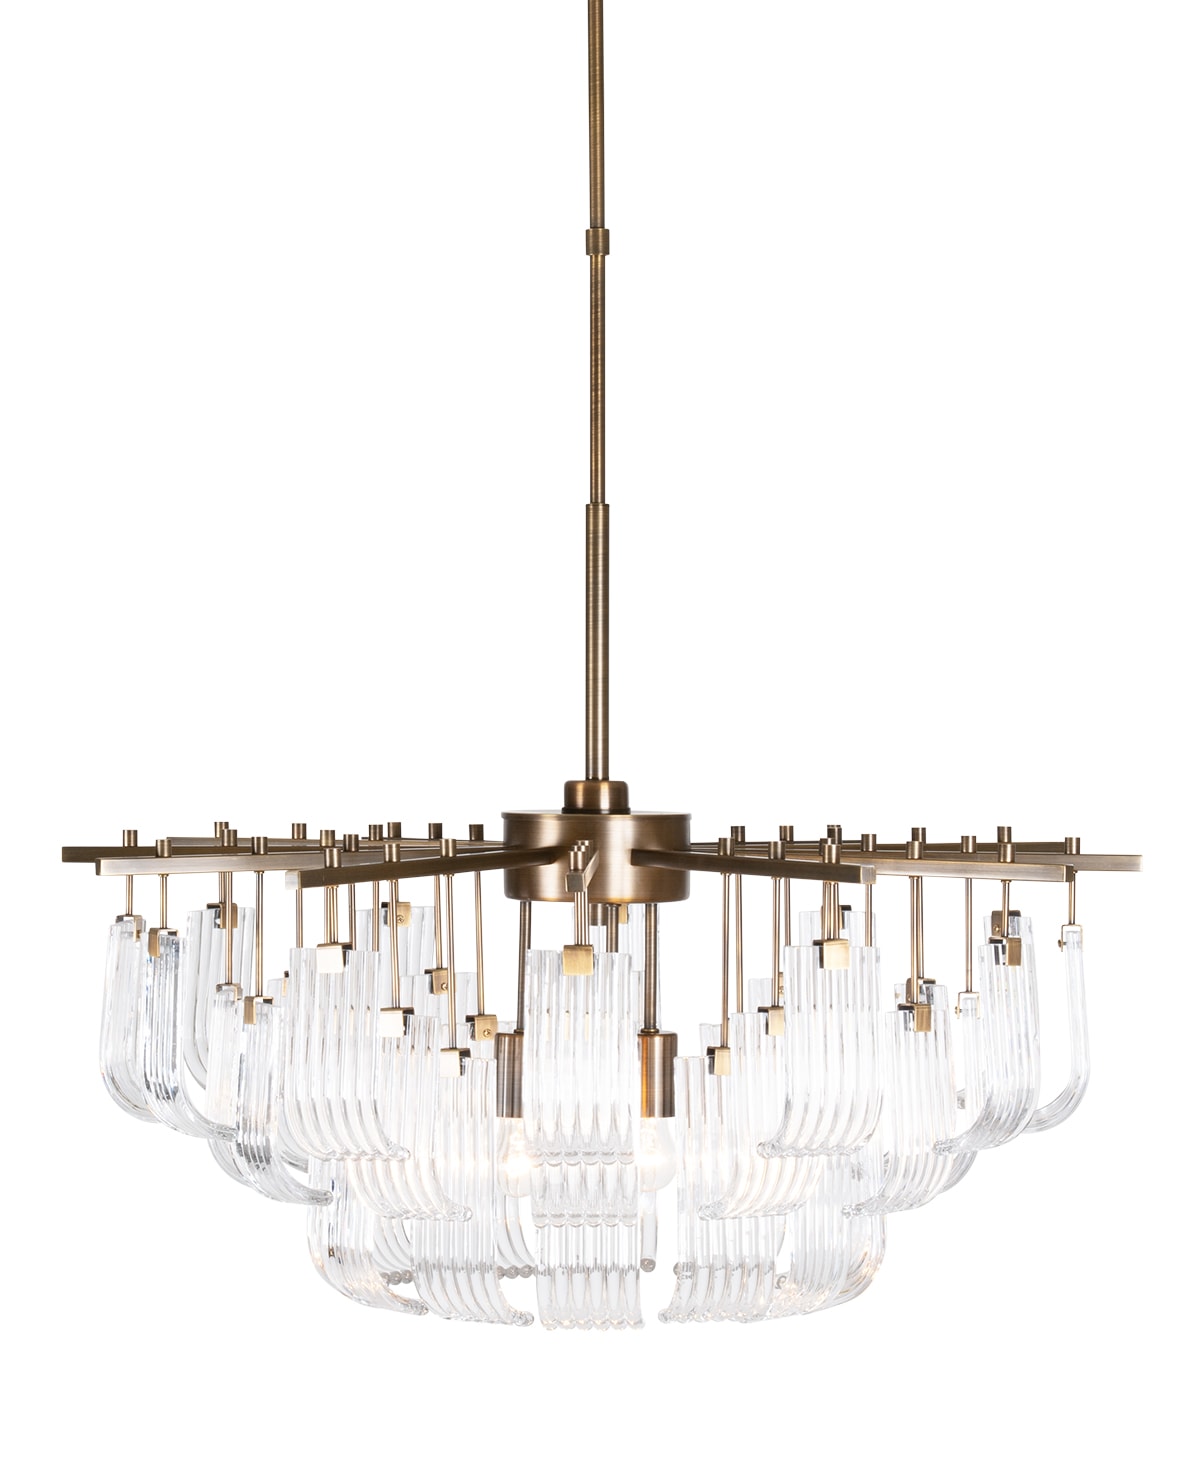 FlowDecor Ferris Chandelier in metal with antique brass finish and glass (# 6051)